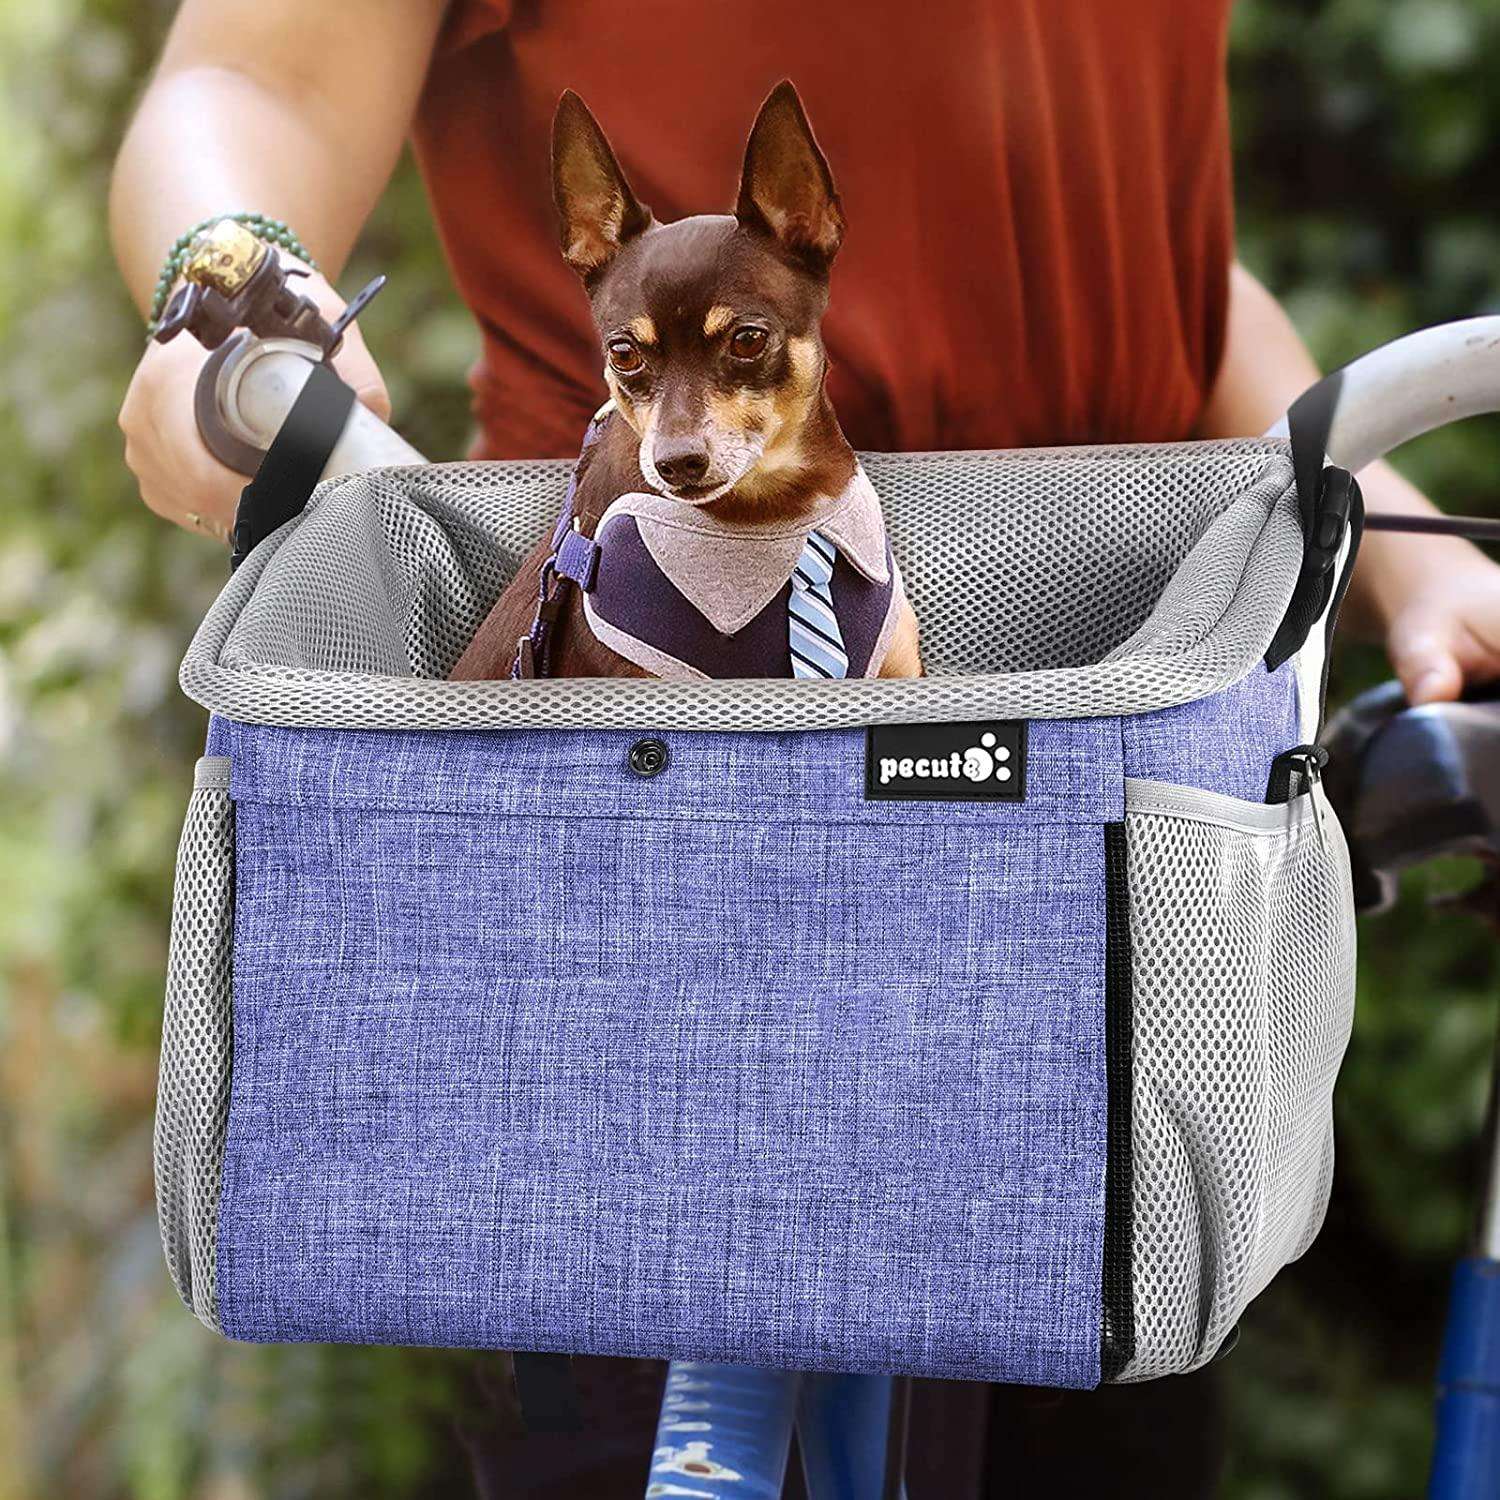 Dog Bike Basket Pet Carrier Bicycle, Car Seat Pet Booster Seat with 2 Big Side Pockets, Portable Breathable Pet Carrier Travel - Bicycle bag - 1